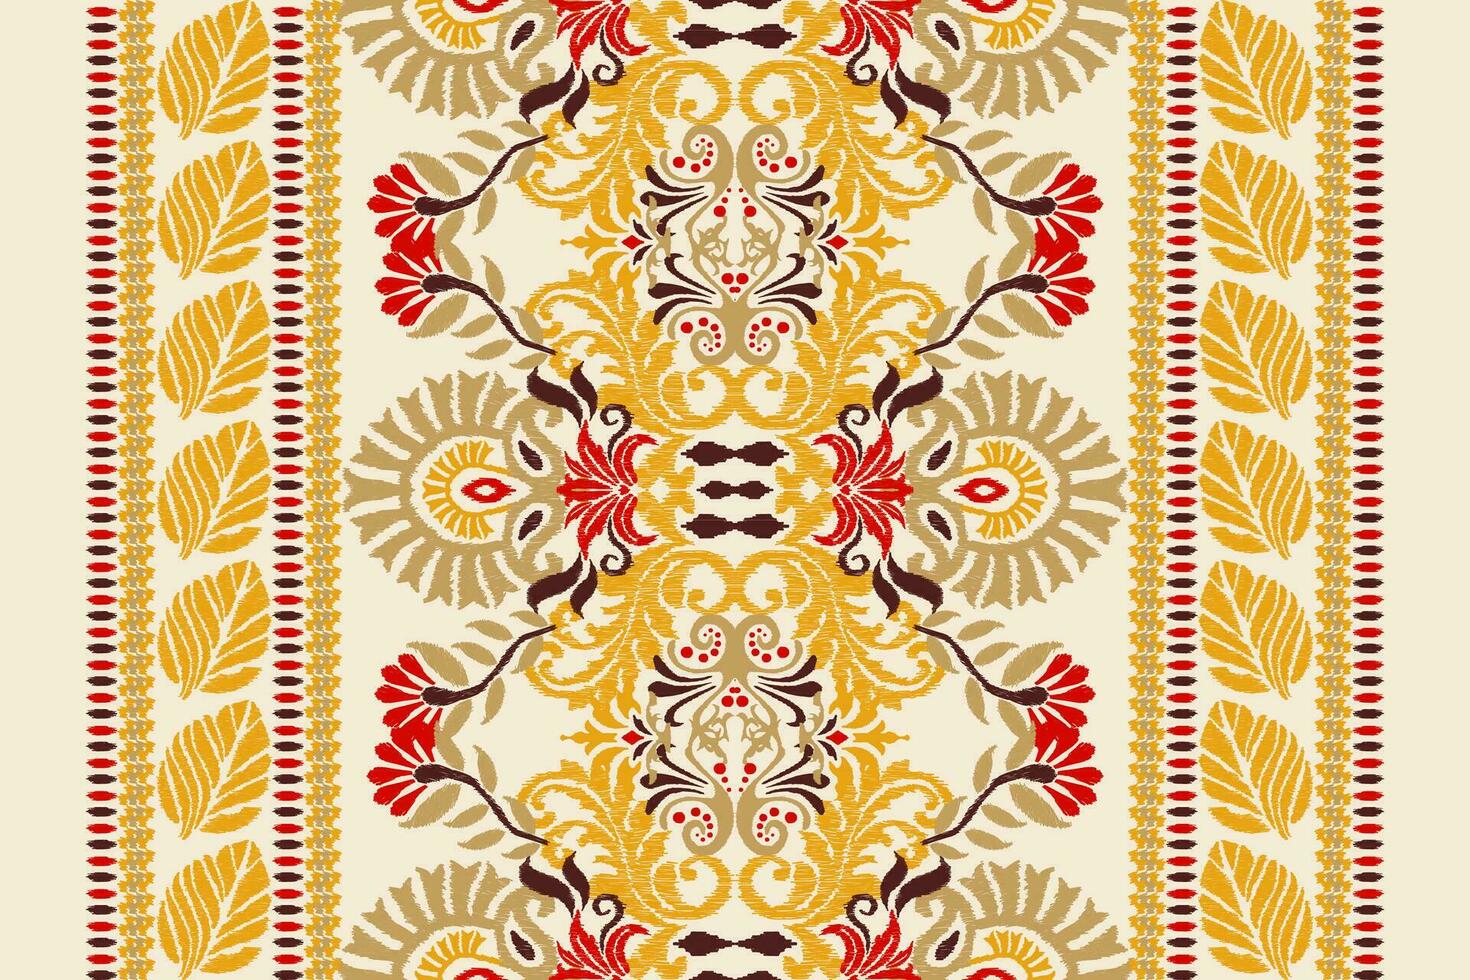 Ikat floral paisley embroidery on white background.Ikat ethnic oriental pattern traditional.Aztec style abstract vector illustration.design for texture,fabric,clothing,wrapping,decoration,scarf,carpet